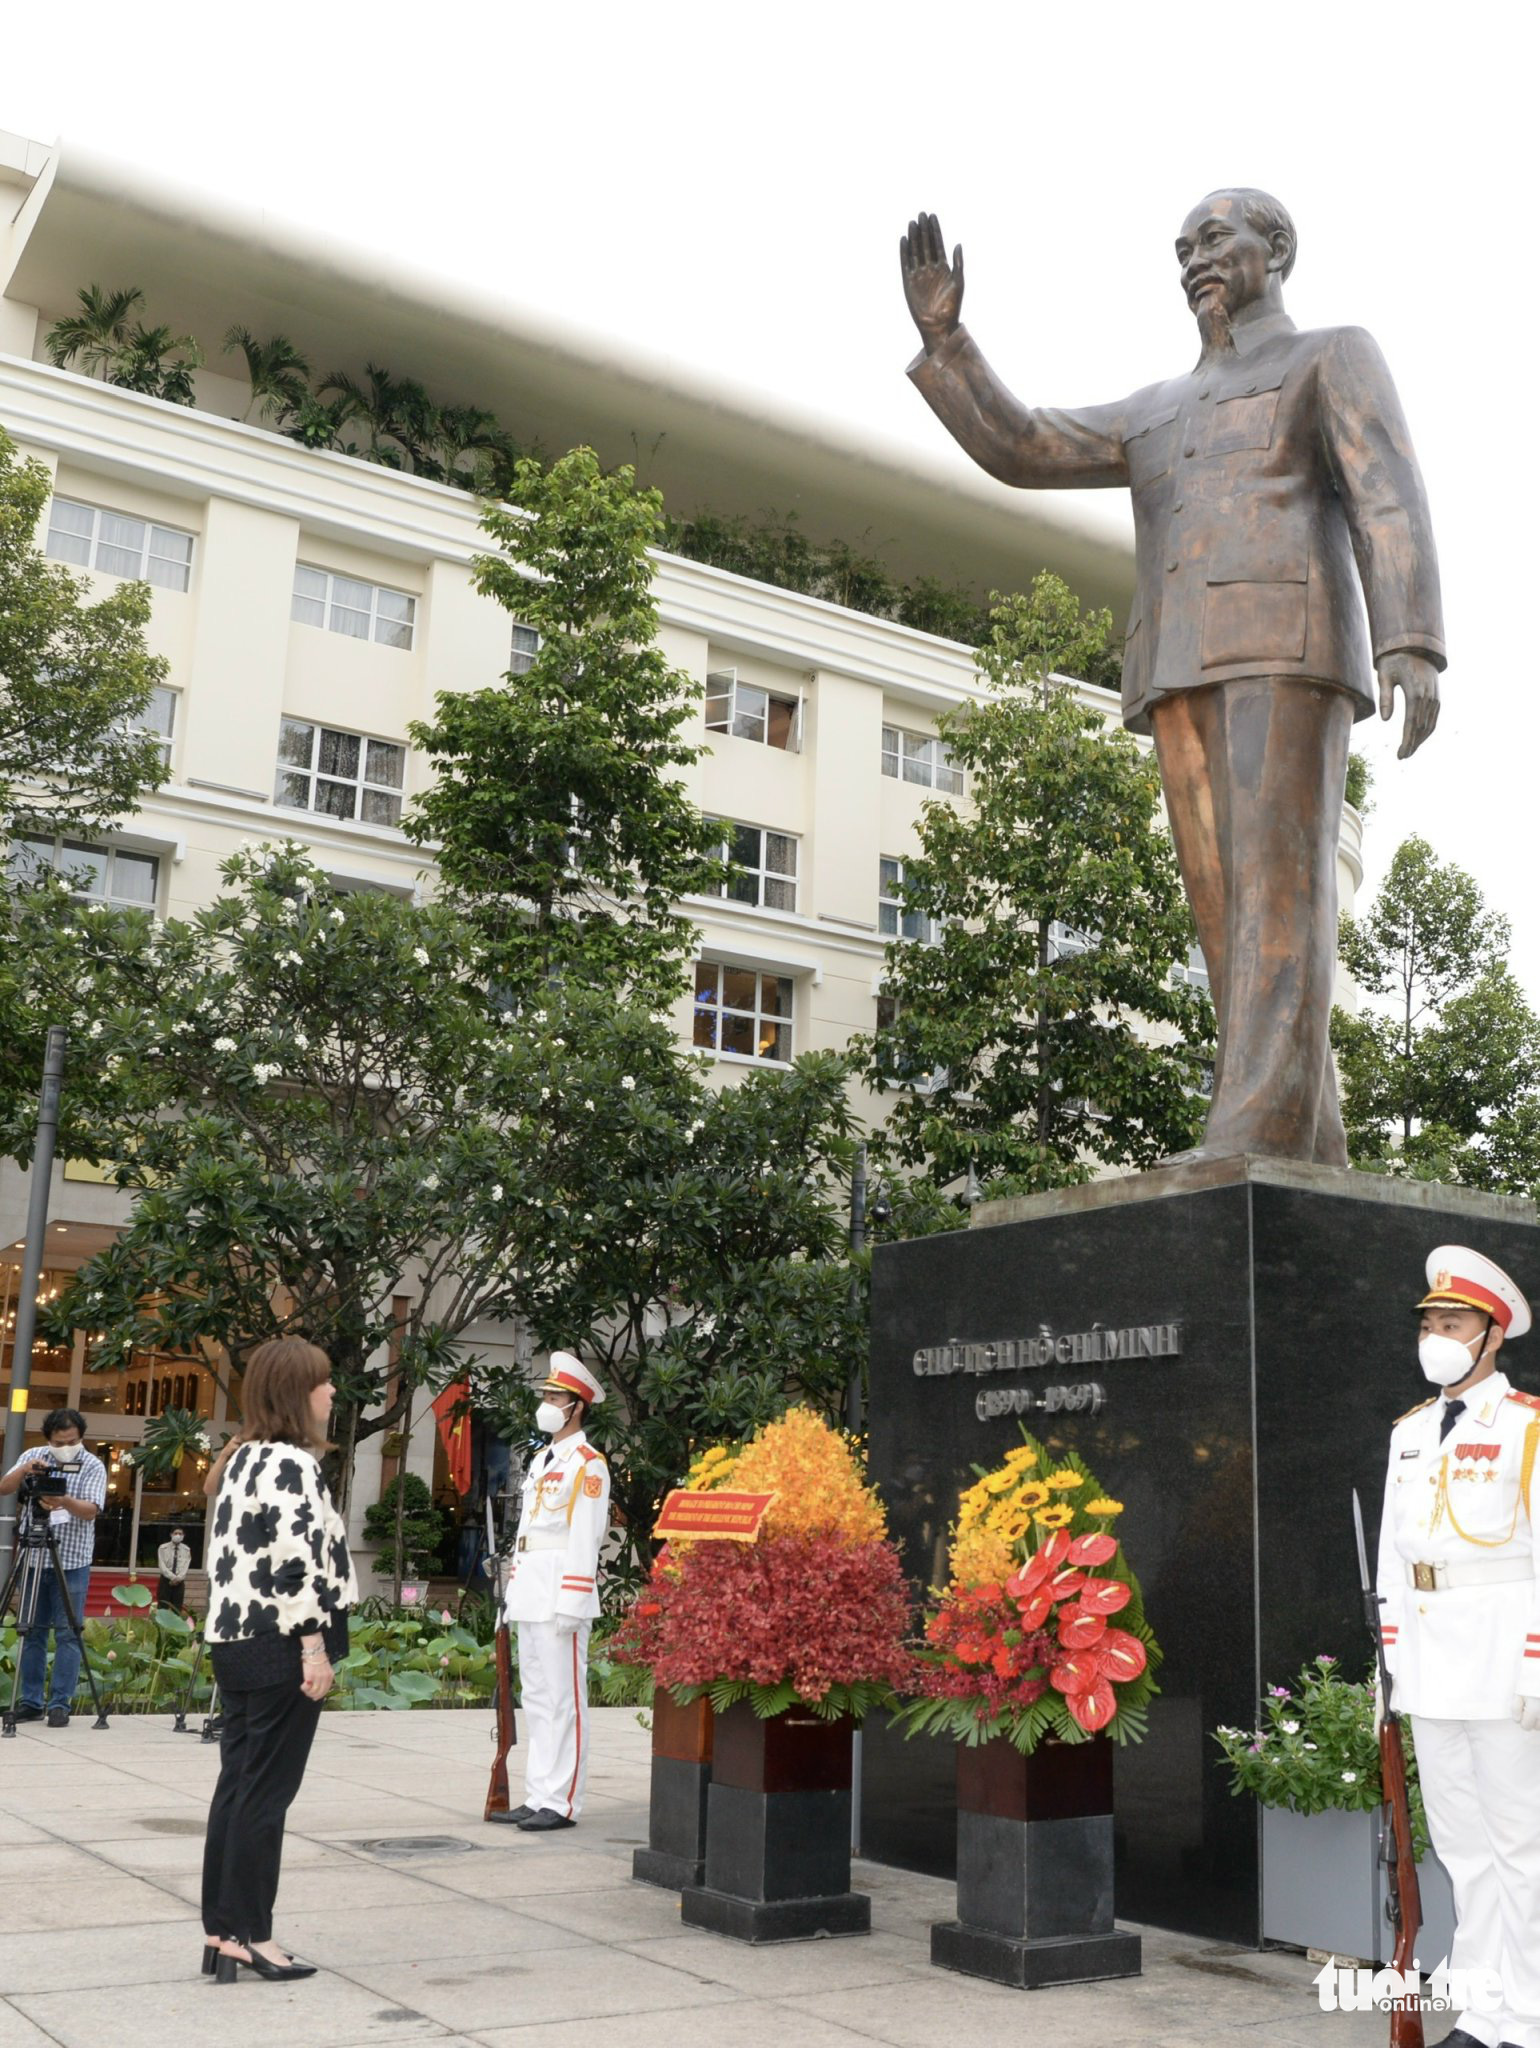 Greek President Katerina Sakellaropoulou lays a wreath at the statue of President Ho Chi Minh in Ho Chi Minh City, May 18, 2022. Photo: T.T.D. / Tuoi Tre